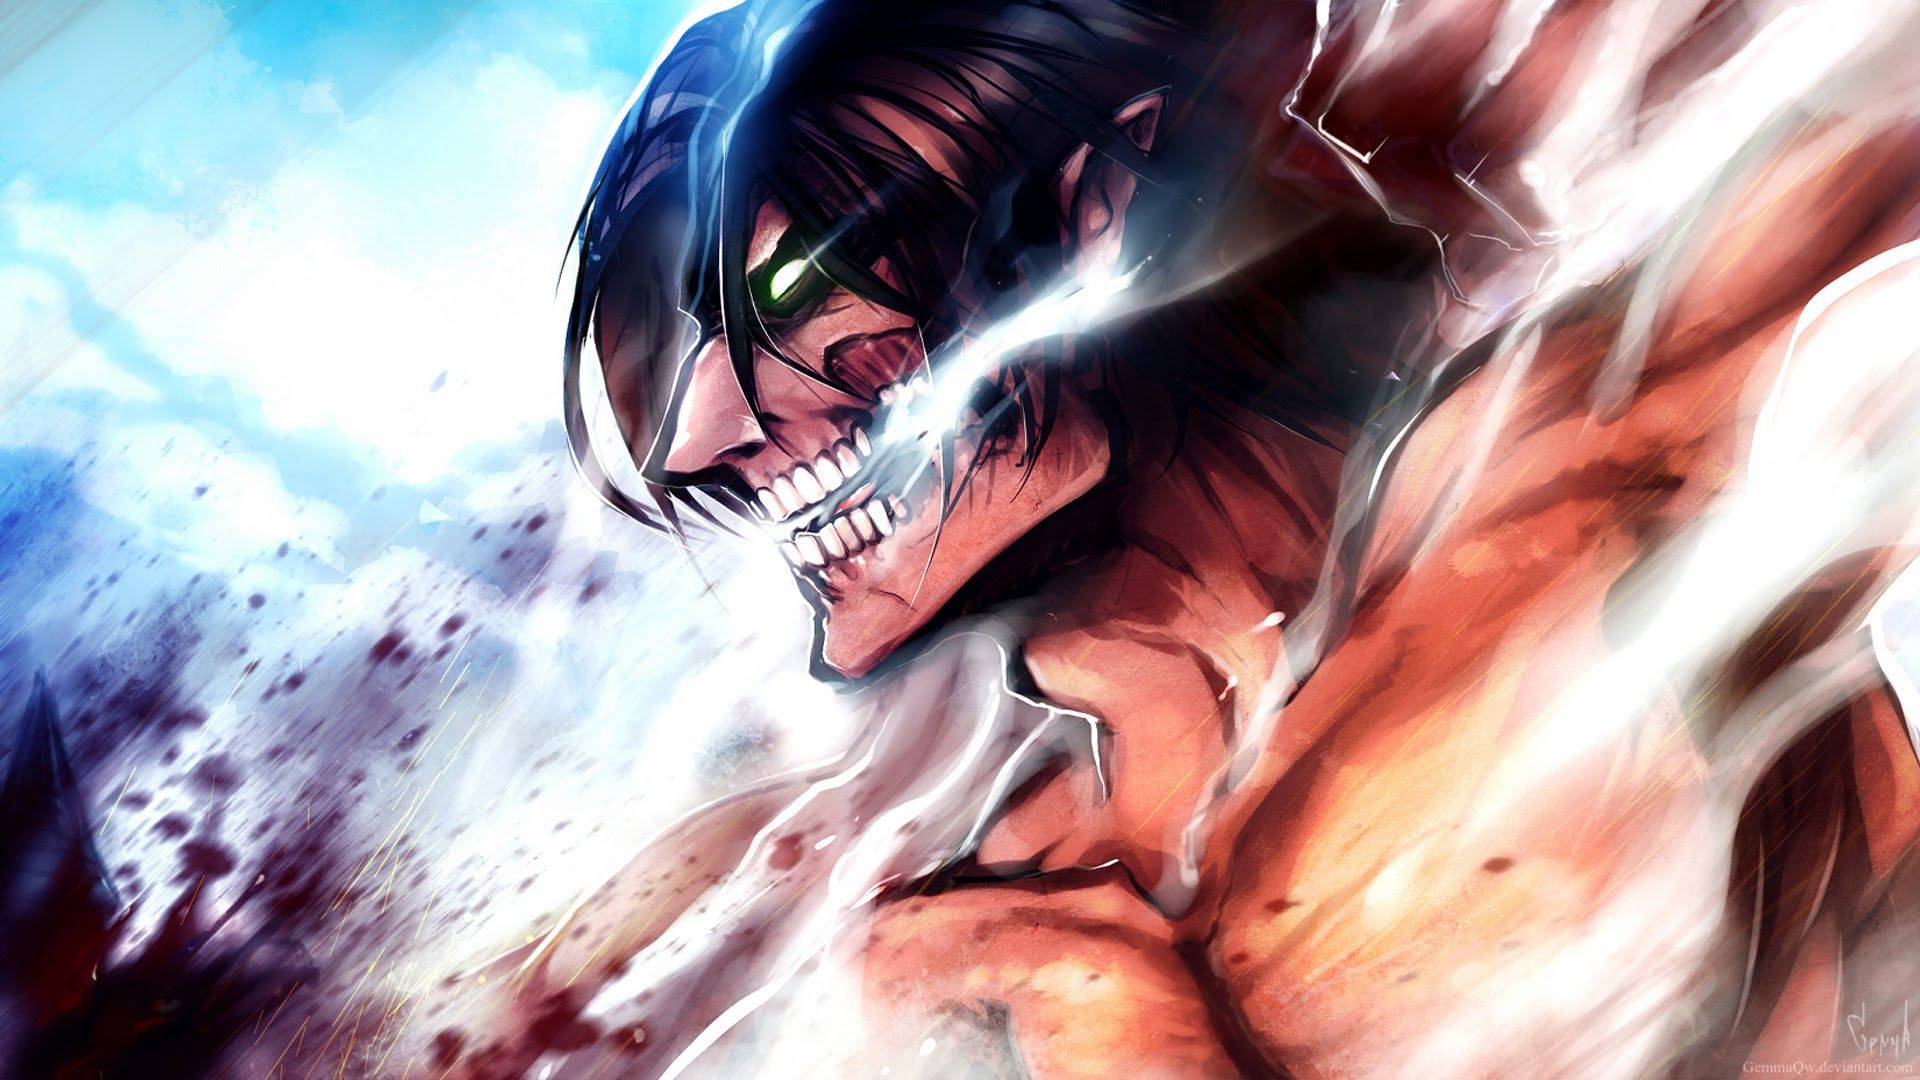 Top 999+ Eren Yeager Wallpaper Full HD, 4K✅Free to Use